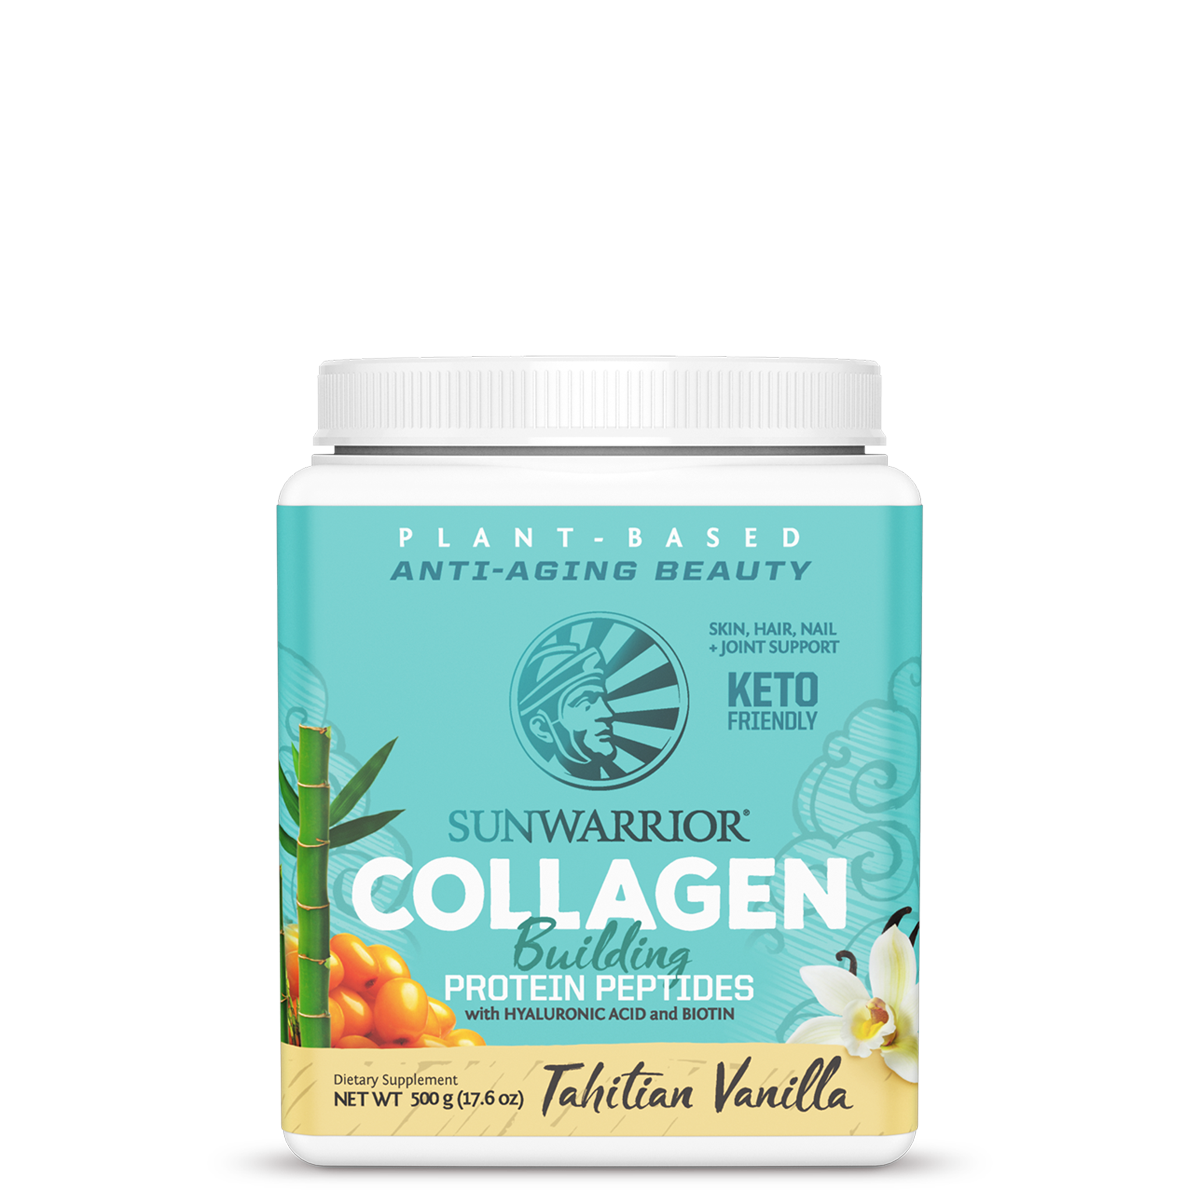 Collagen Building Protein Peptides NEW!